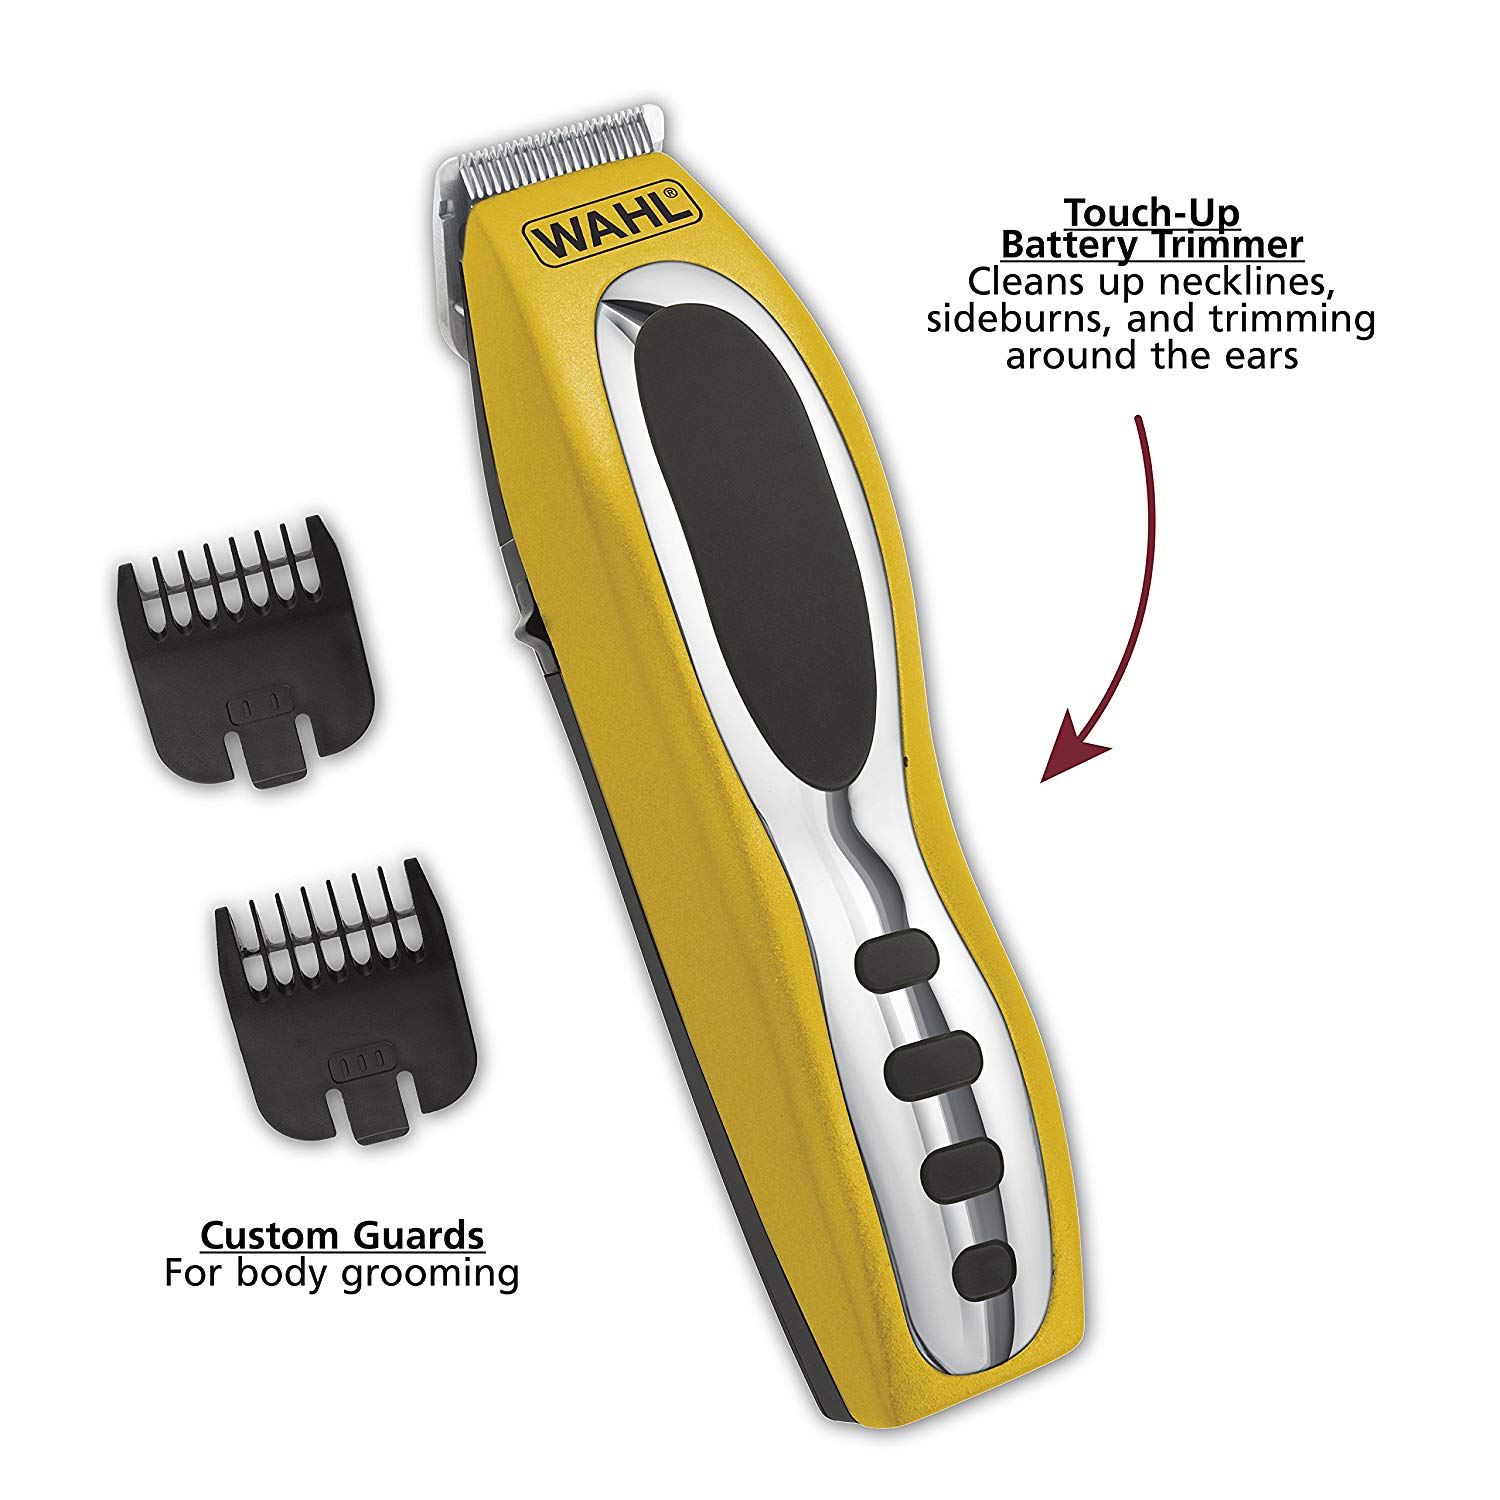 wahl groom pro cordless